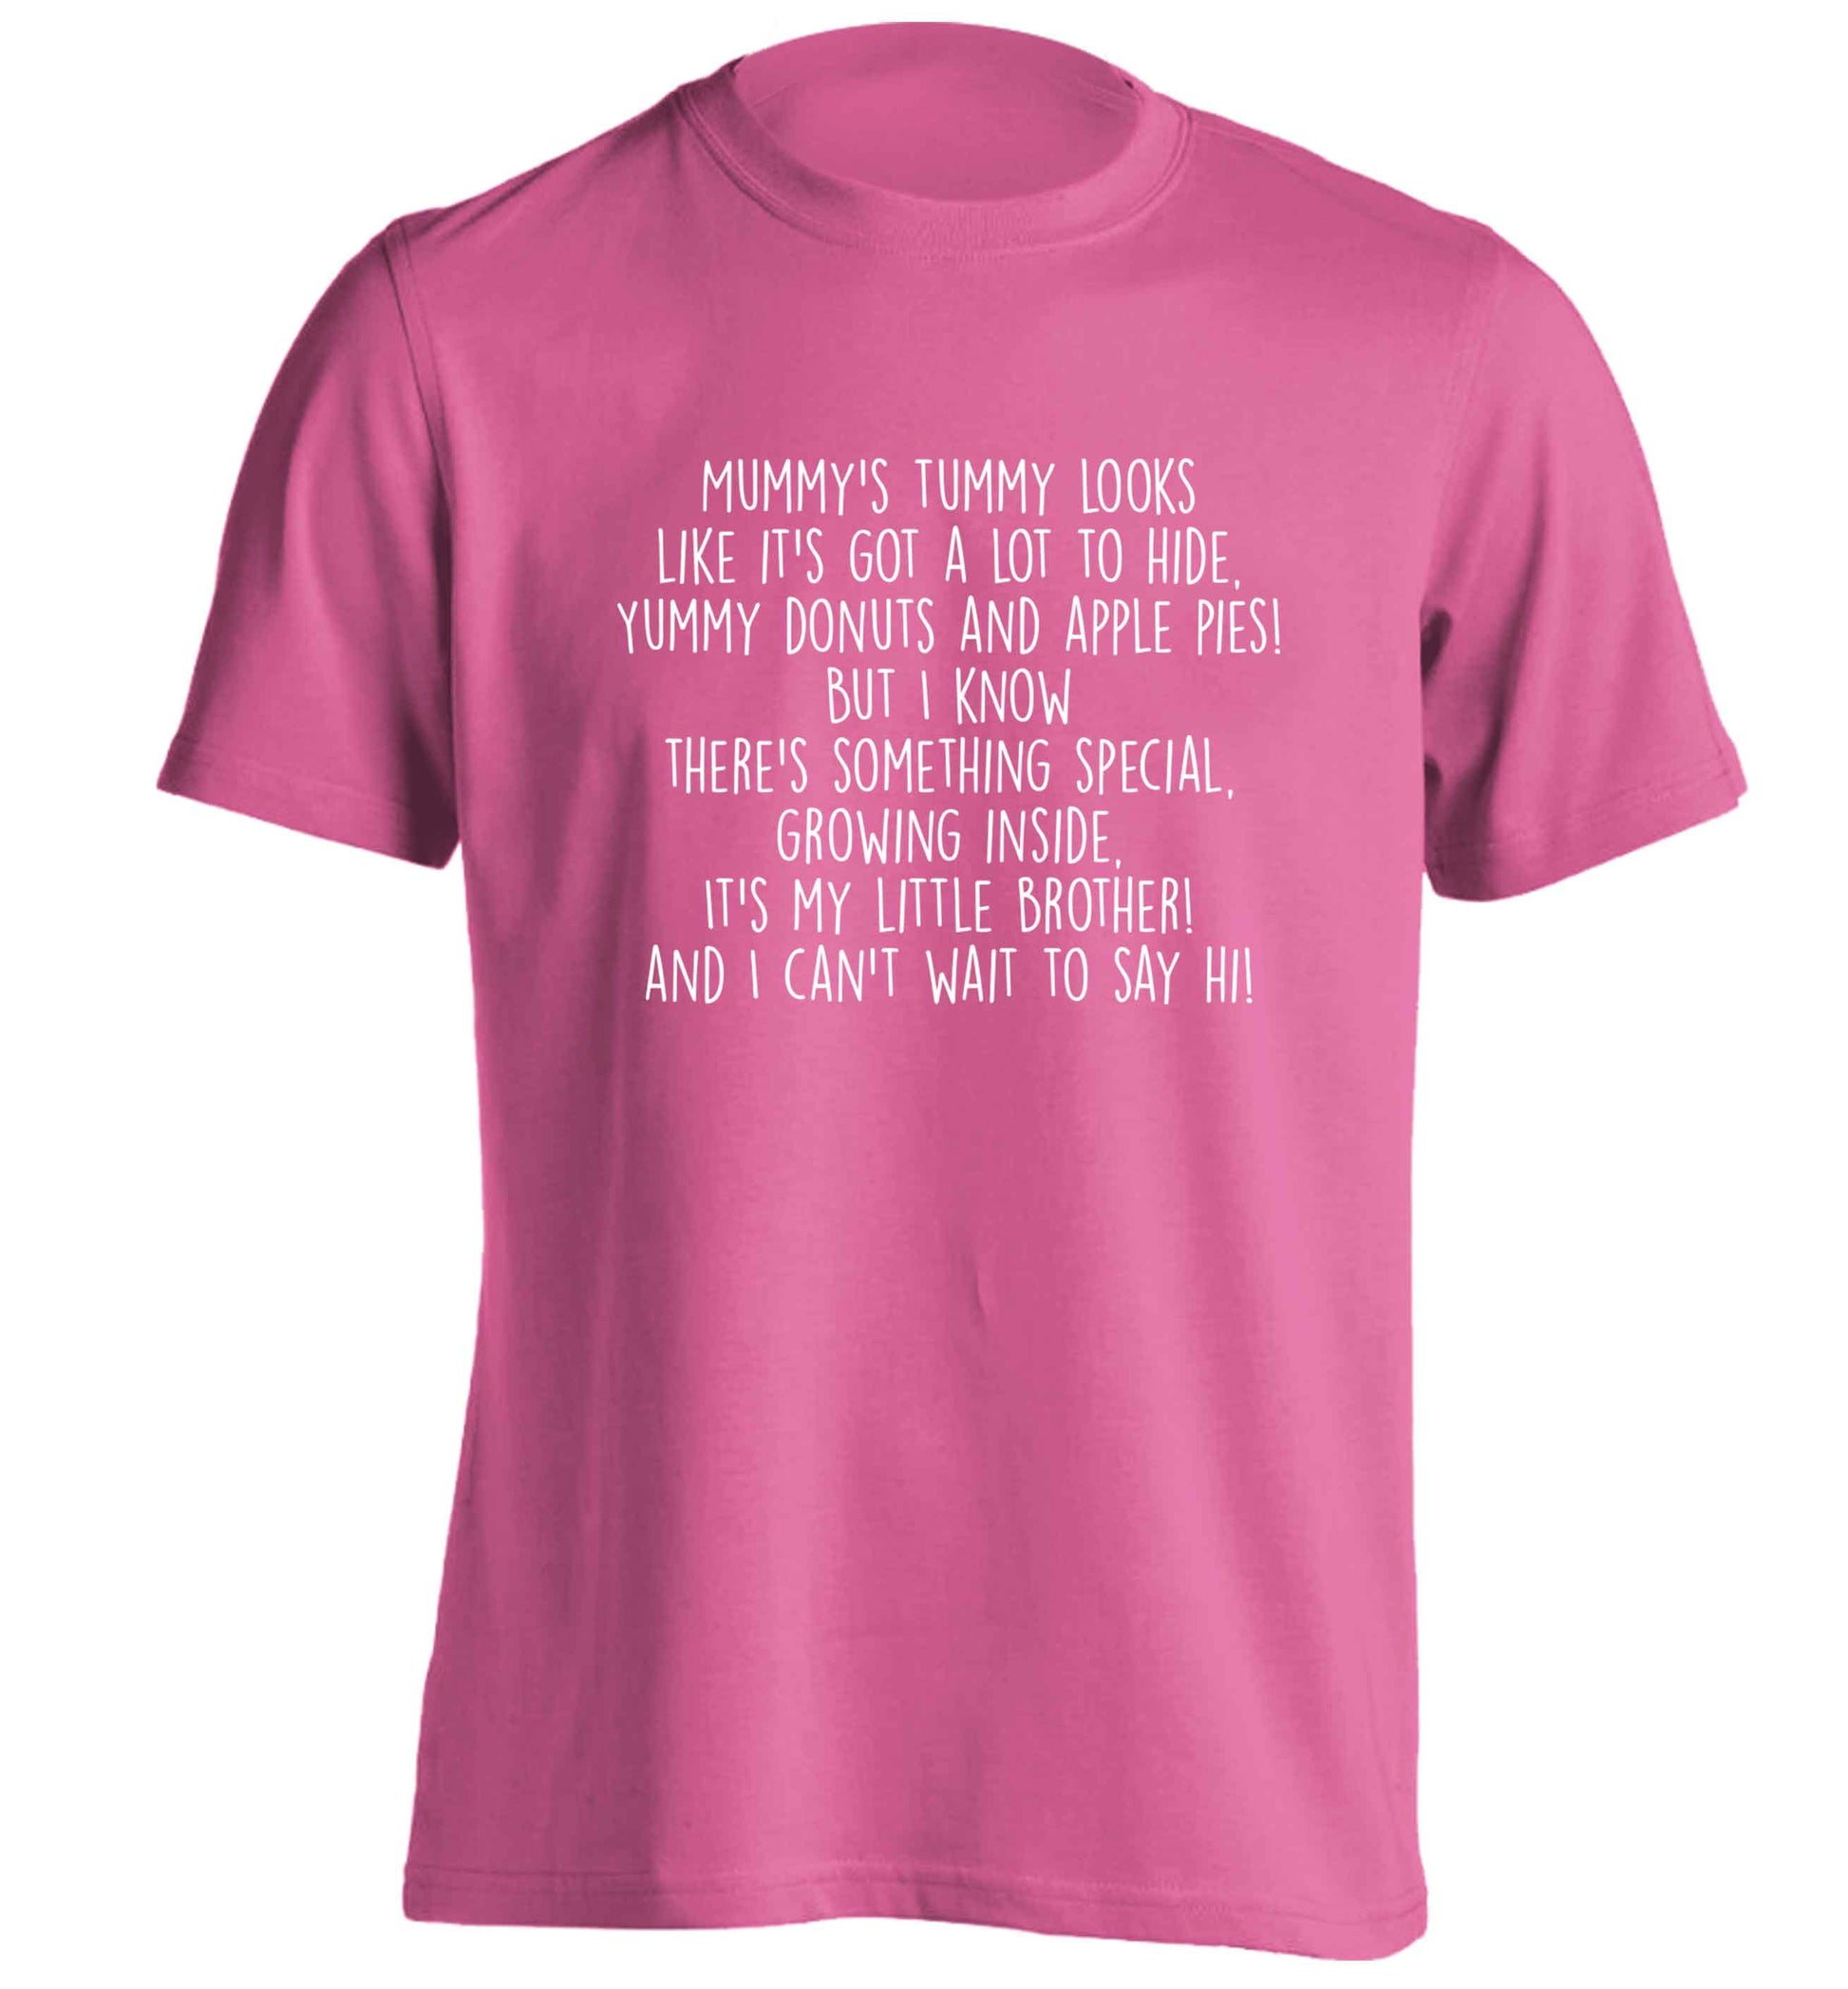 Something special growing inside it's my little brother I can't wait to say hi! adults unisex pink Tshirt 2XL